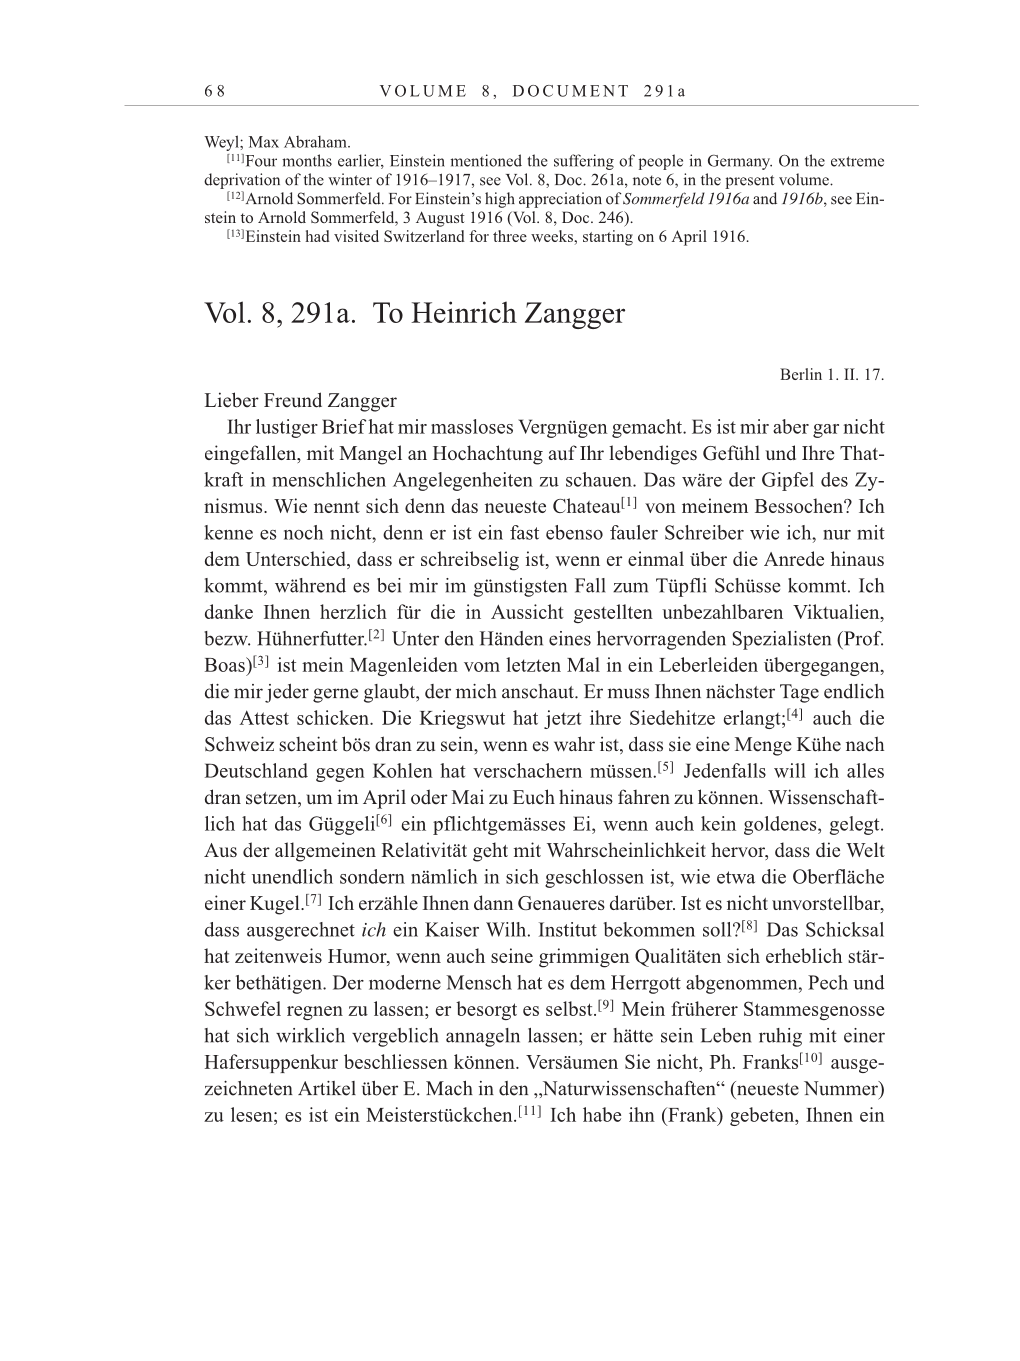 Volume 10: The Berlin Years: Correspondence May-December 1920 / Supplementary Correspondence 1909-1920 page 68